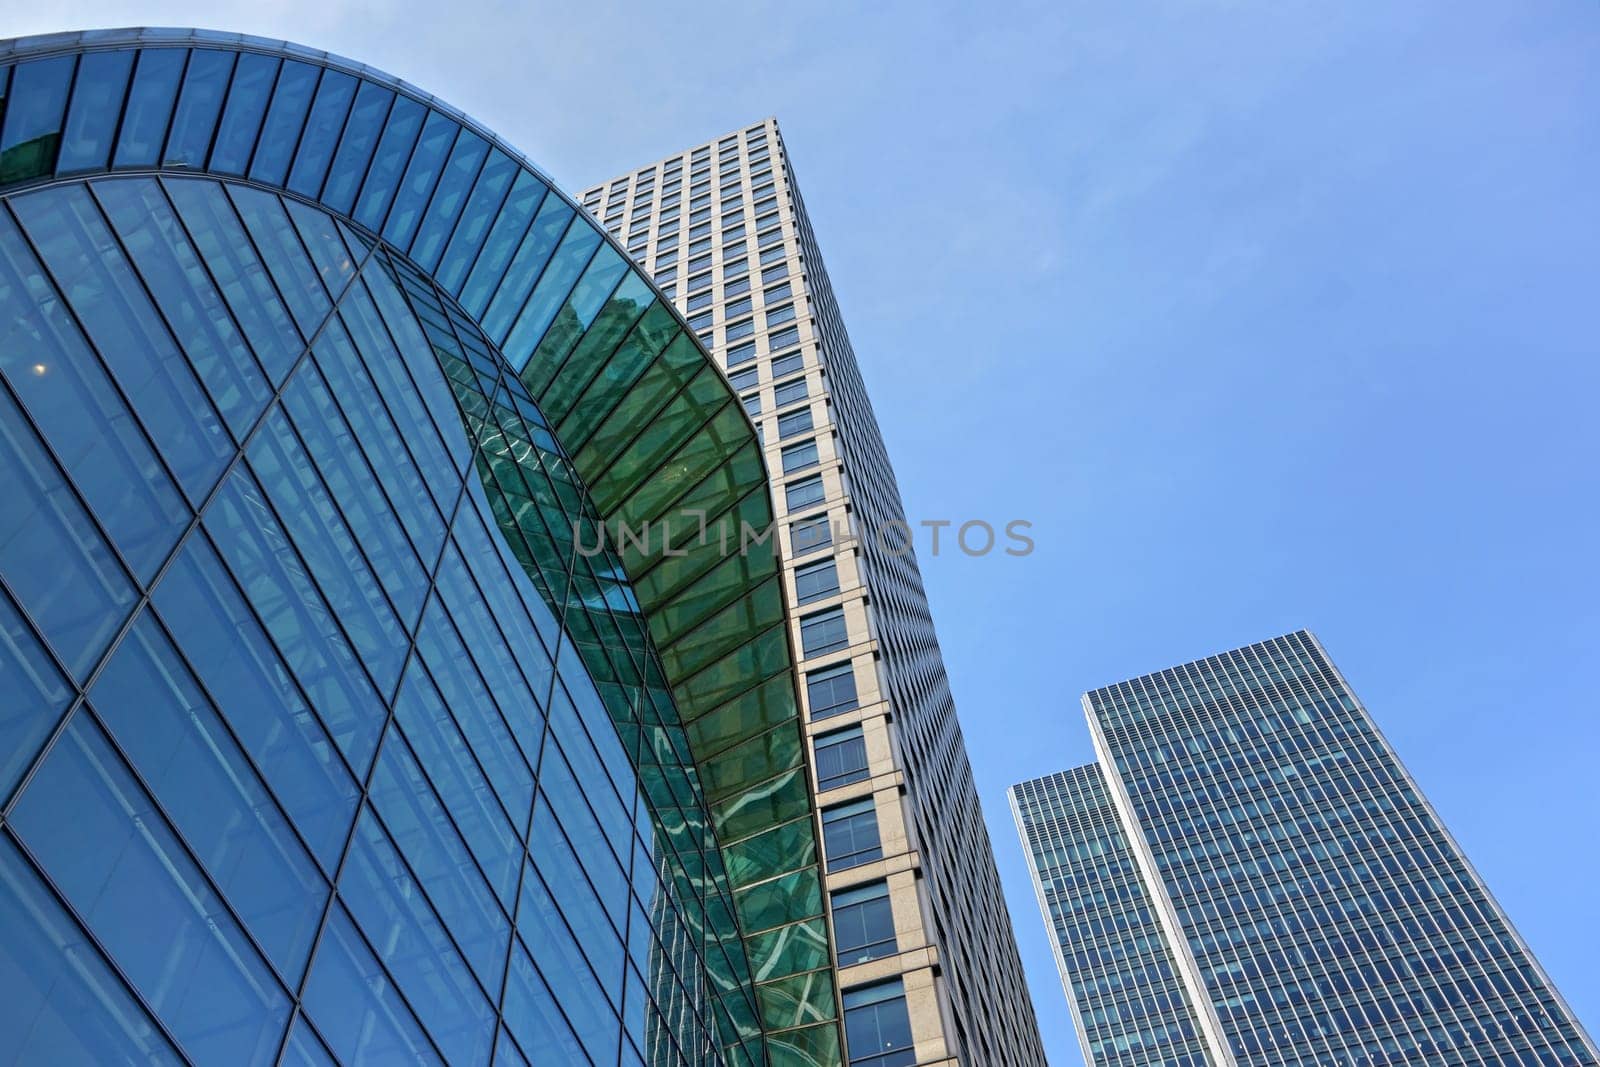 London, United Kingdom - February 03, 2019: Looking up Canada Water tube station entrance and 40 and 25 Bank Street buildings designed by Cesar Pelli & Associates on sunny day.